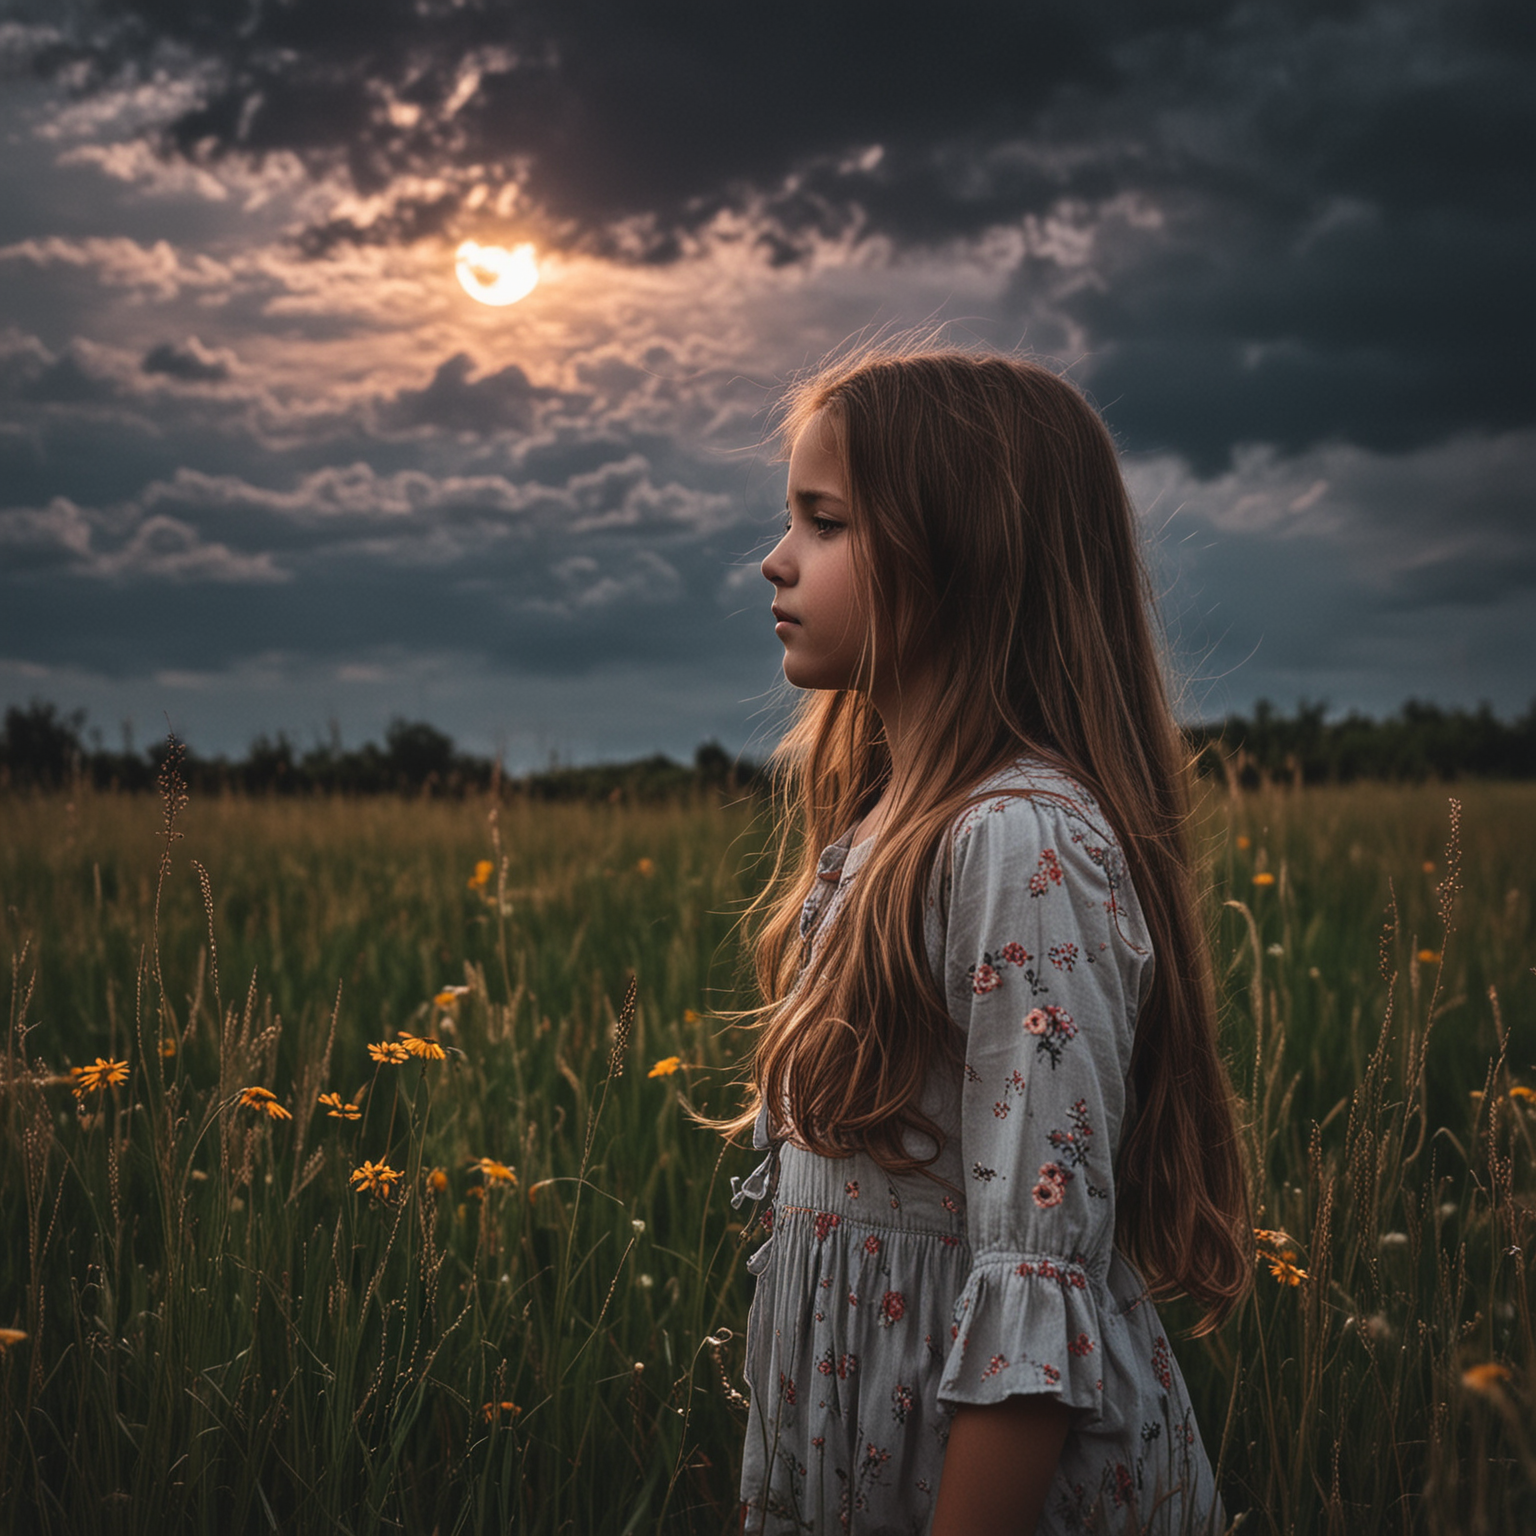 Lonely Child in Colorful Meadow under Stormy Sky